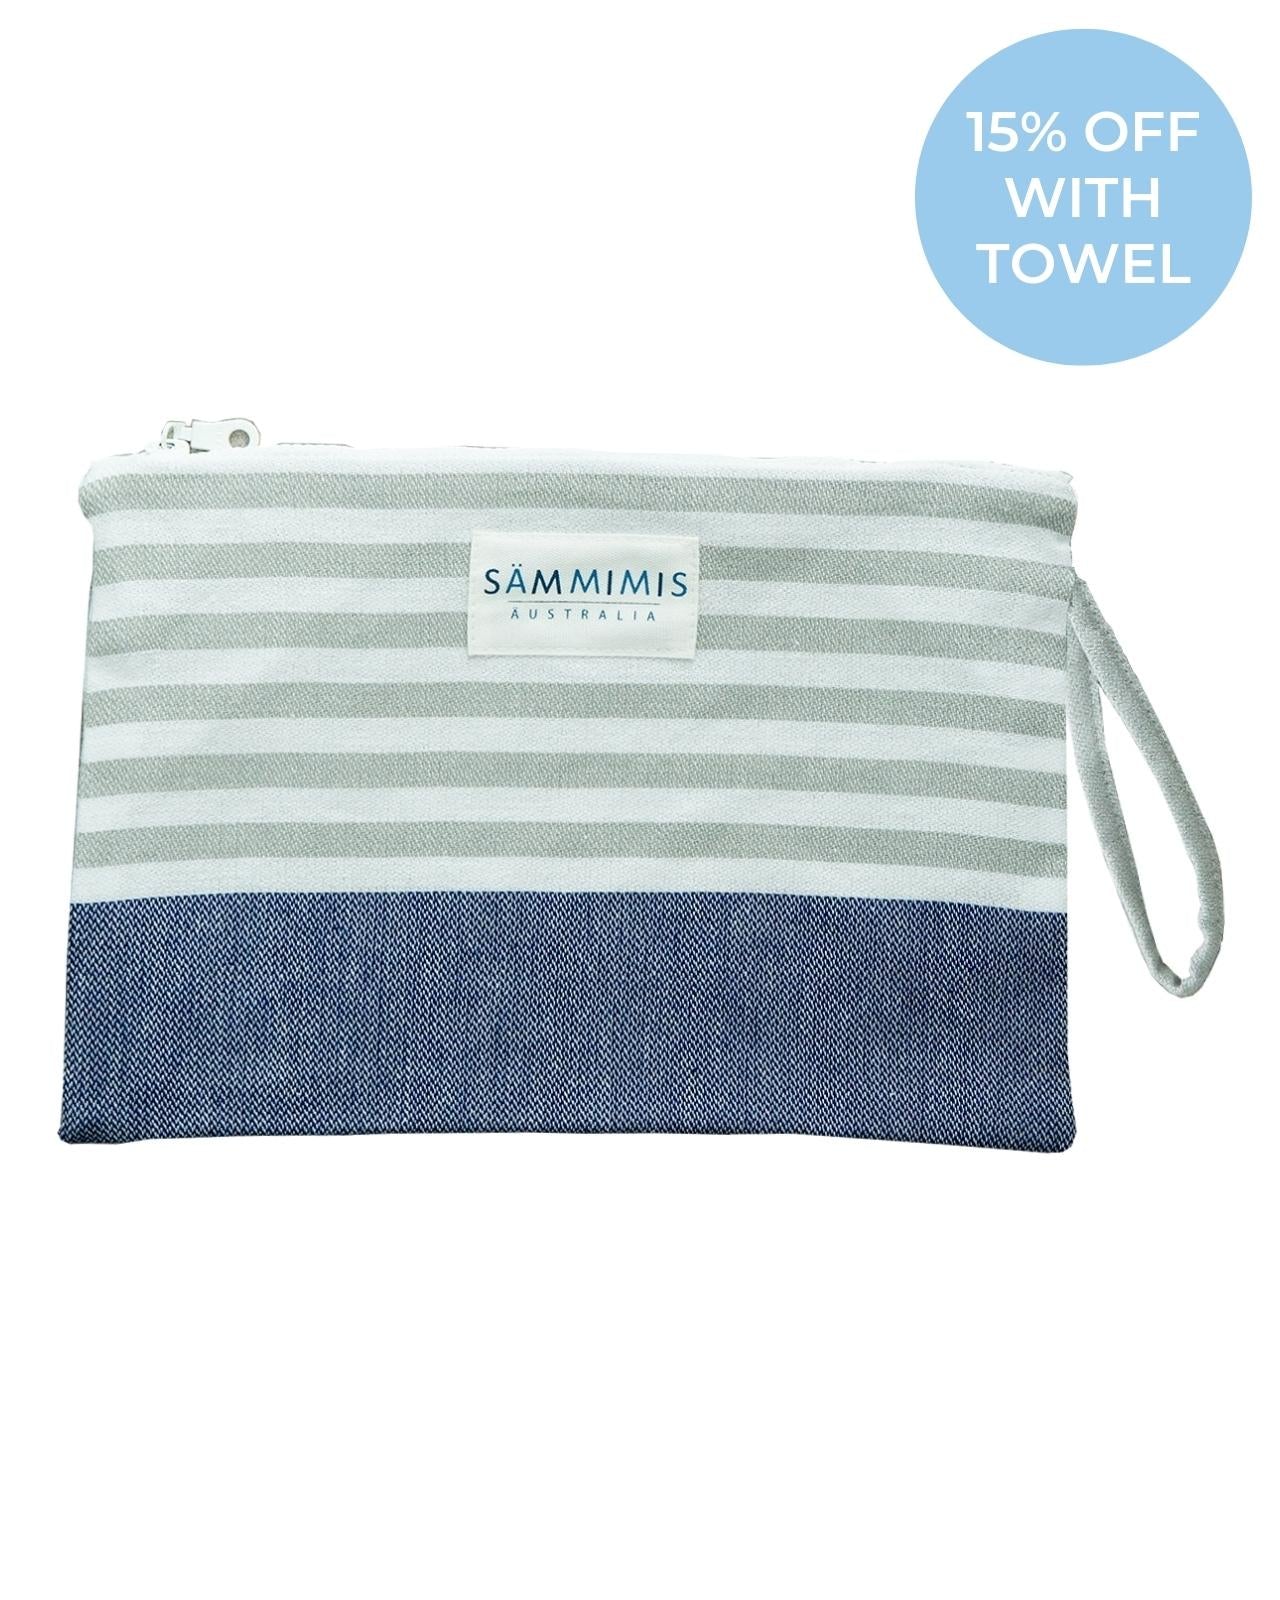 MAYO Swimsuit Wet Bag: Navy/Silver Grey